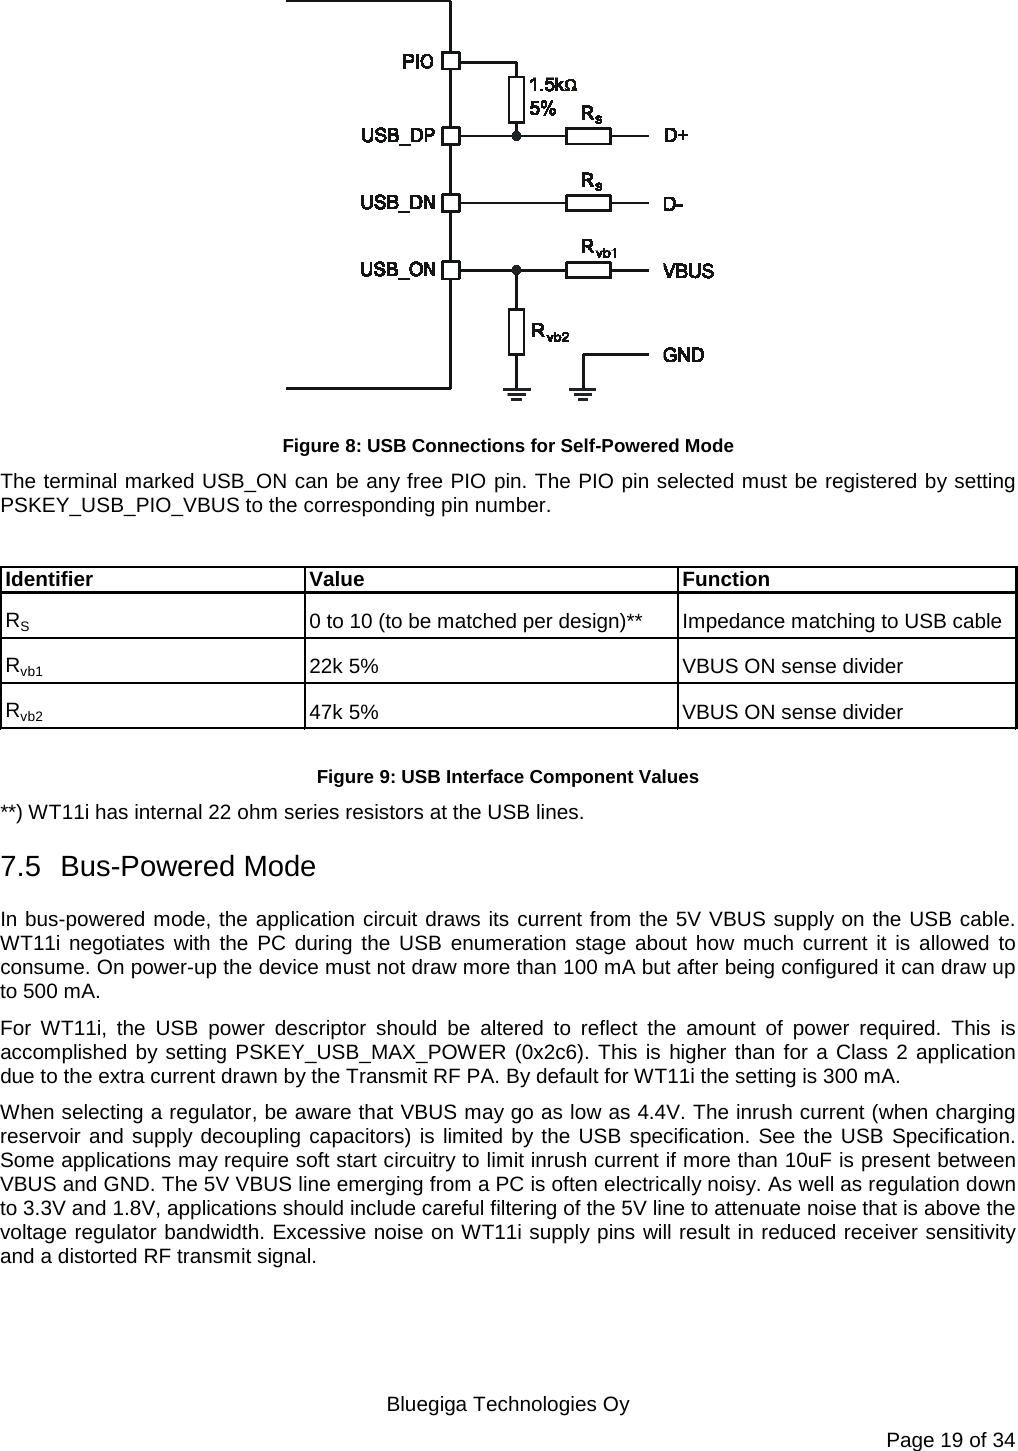   Bluegiga Technologies Oy Page 19 of 34  Figure 8: USB Connections for Self-Powered Mode The terminal marked USB_ON can be any free PIO pin. The PIO pin selected must be registered by setting PSKEY_USB_PIO_VBUS to the corresponding pin number.  Identifier Value FunctionRS0 to 10 (to be matched per design)** Impedance matching to USB cableRvb122k 5% VBUS ON sense dividerRvb247k 5% VBUS ON sense divider Figure 9: USB Interface Component Values **) WT11i has internal 22 ohm series resistors at the USB lines. 7.5 Bus-Powered Mode In bus-powered mode, the application circuit draws its current from the 5V VBUS supply on the USB cable. WT11i negotiates with the PC during the USB enumeration stage about how much current it is allowed to consume. On power-up the device must not draw more than 100 mA but after being configured it can draw up to 500 mA. For  WT11i, the USB power descriptor should be altered to reflect the amount of power required. This is accomplished by setting PSKEY_USB_MAX_POWER (0x2c6). This is higher than for a Class 2 application due to the extra current drawn by the Transmit RF PA. By default for WT11i the setting is 300 mA. When selecting a regulator, be aware that VBUS may go as low as 4.4V. The inrush current (when charging reservoir and supply decoupling capacitors) is limited by the USB specification. See the USB Specification. Some applications may require soft start circuitry to limit inrush current if more than 10uF is present between VBUS and GND. The 5V VBUS line emerging from a PC is often electrically noisy. As well as regulation down to 3.3V and 1.8V, applications should include careful filtering of the 5V line to attenuate noise that is above the voltage regulator bandwidth. Excessive noise on WT11i supply pins will result in reduced receiver sensitivity and a distorted RF transmit signal. 